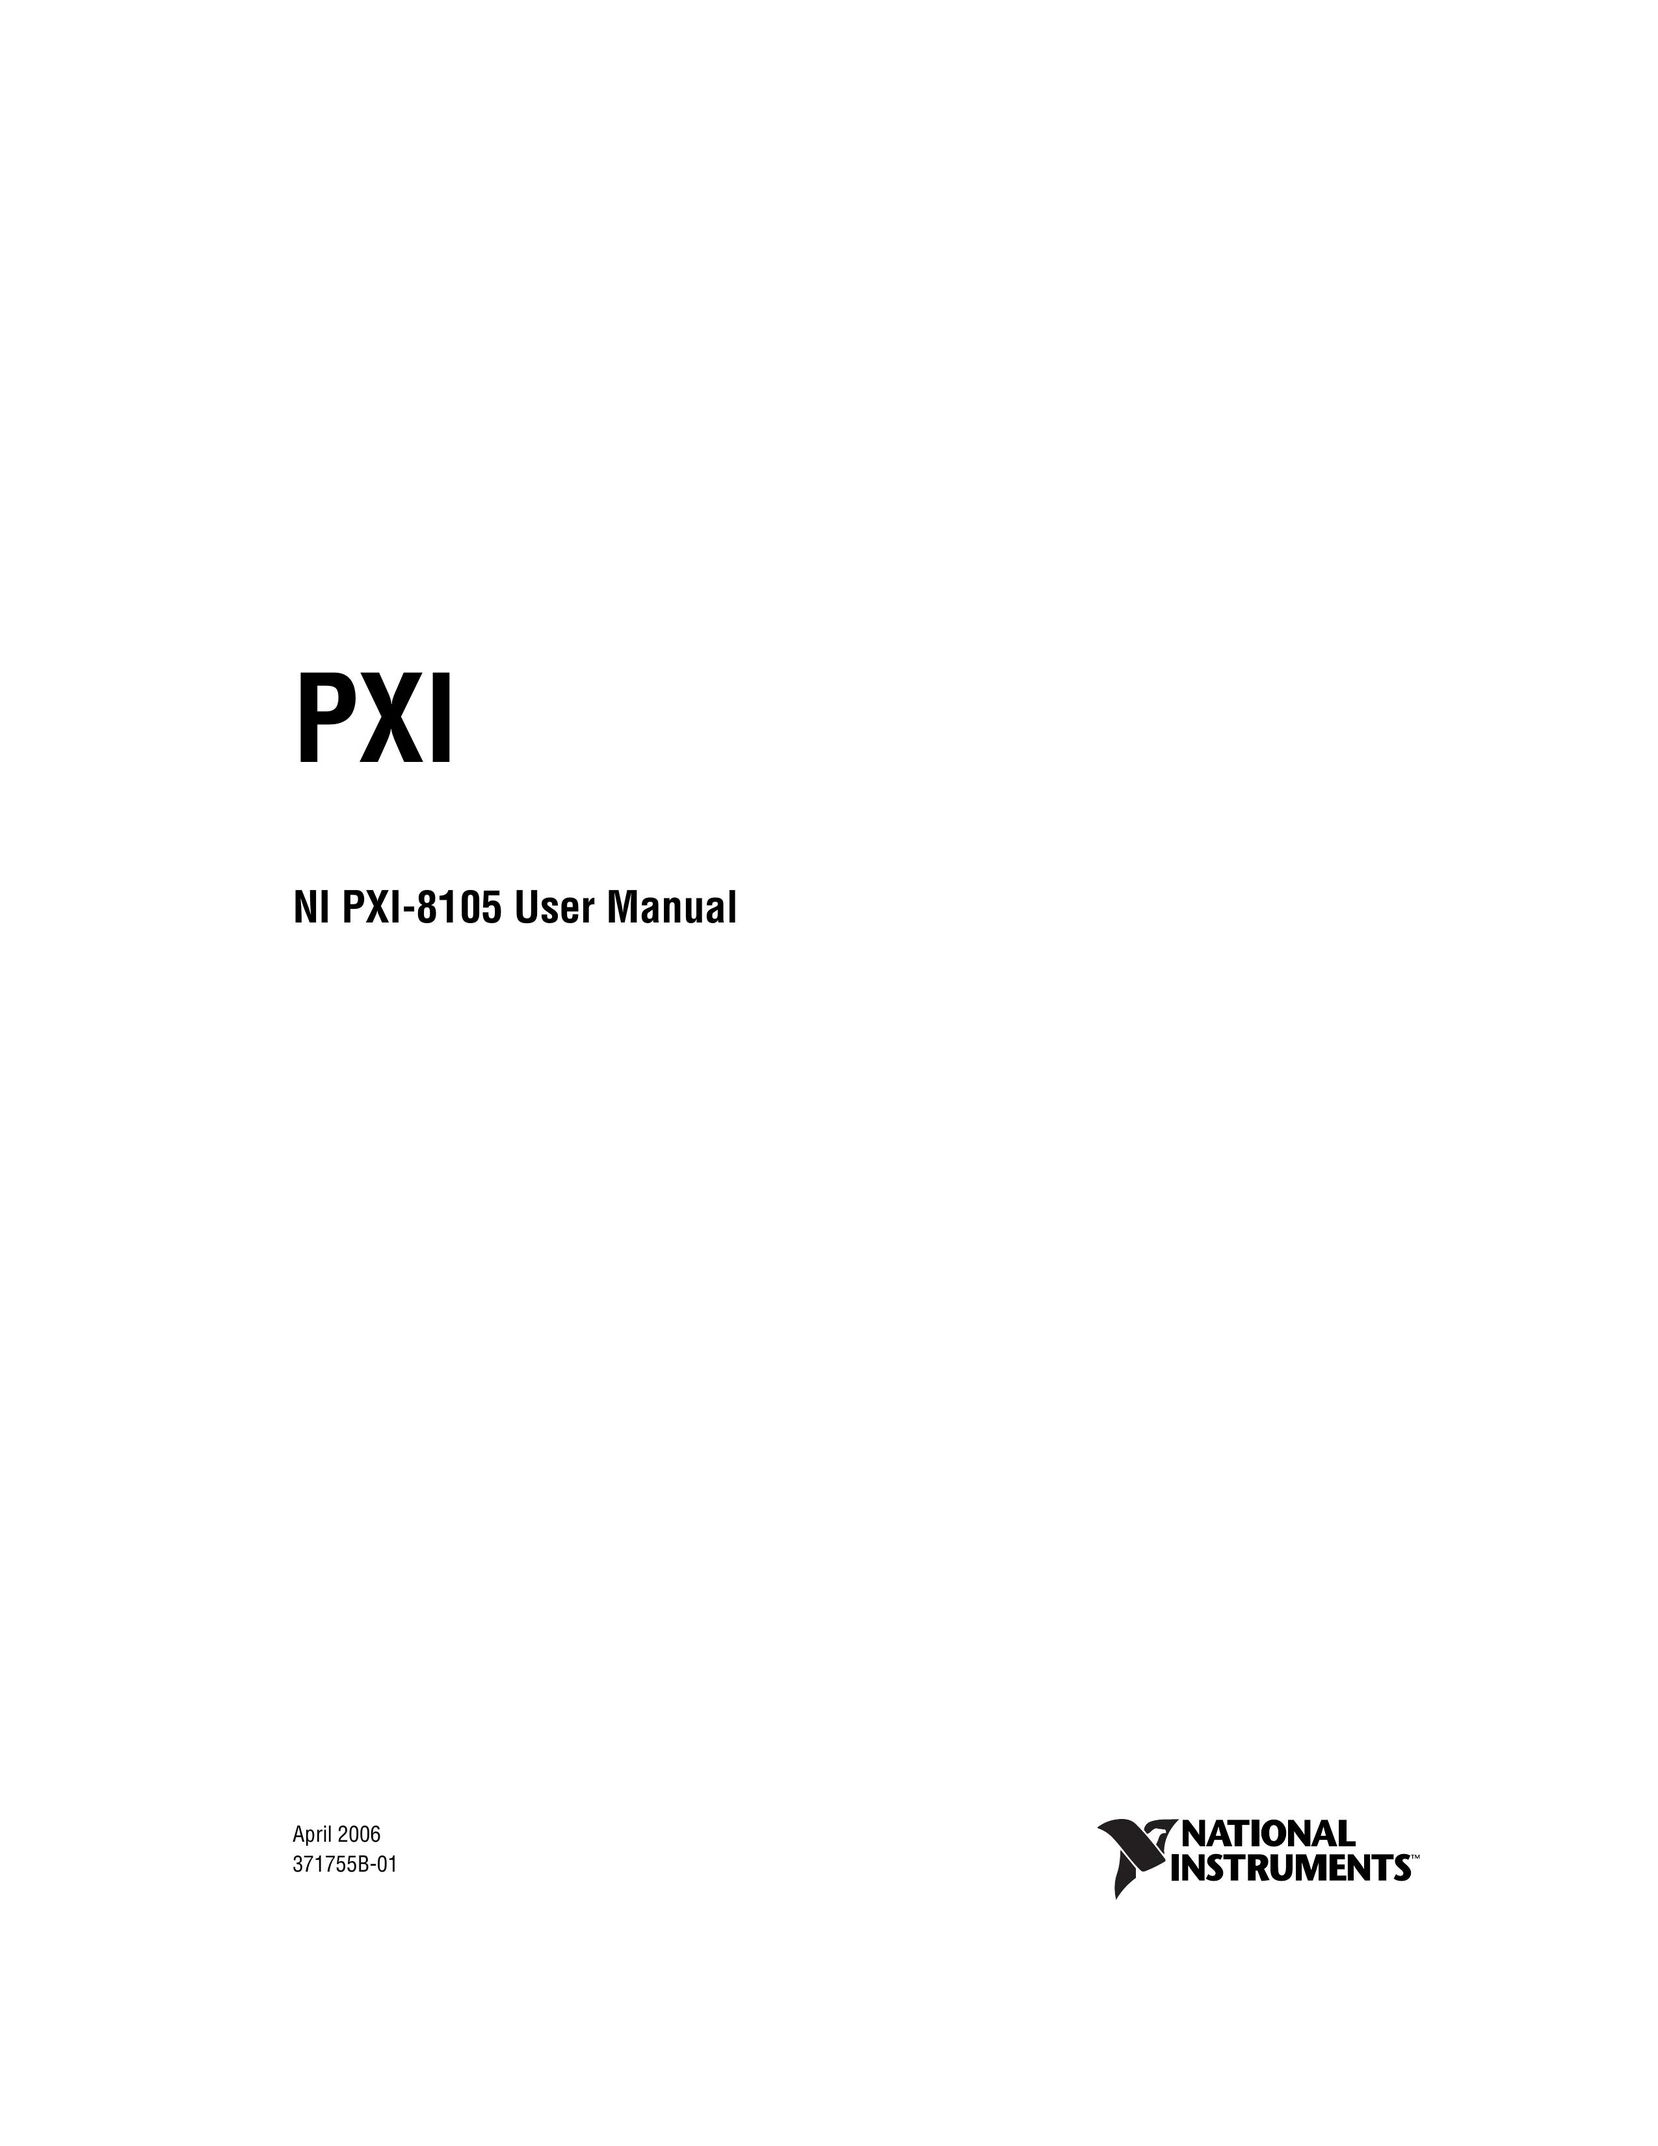 National Instruments PXI NI PXI-8105 Switch User Manual